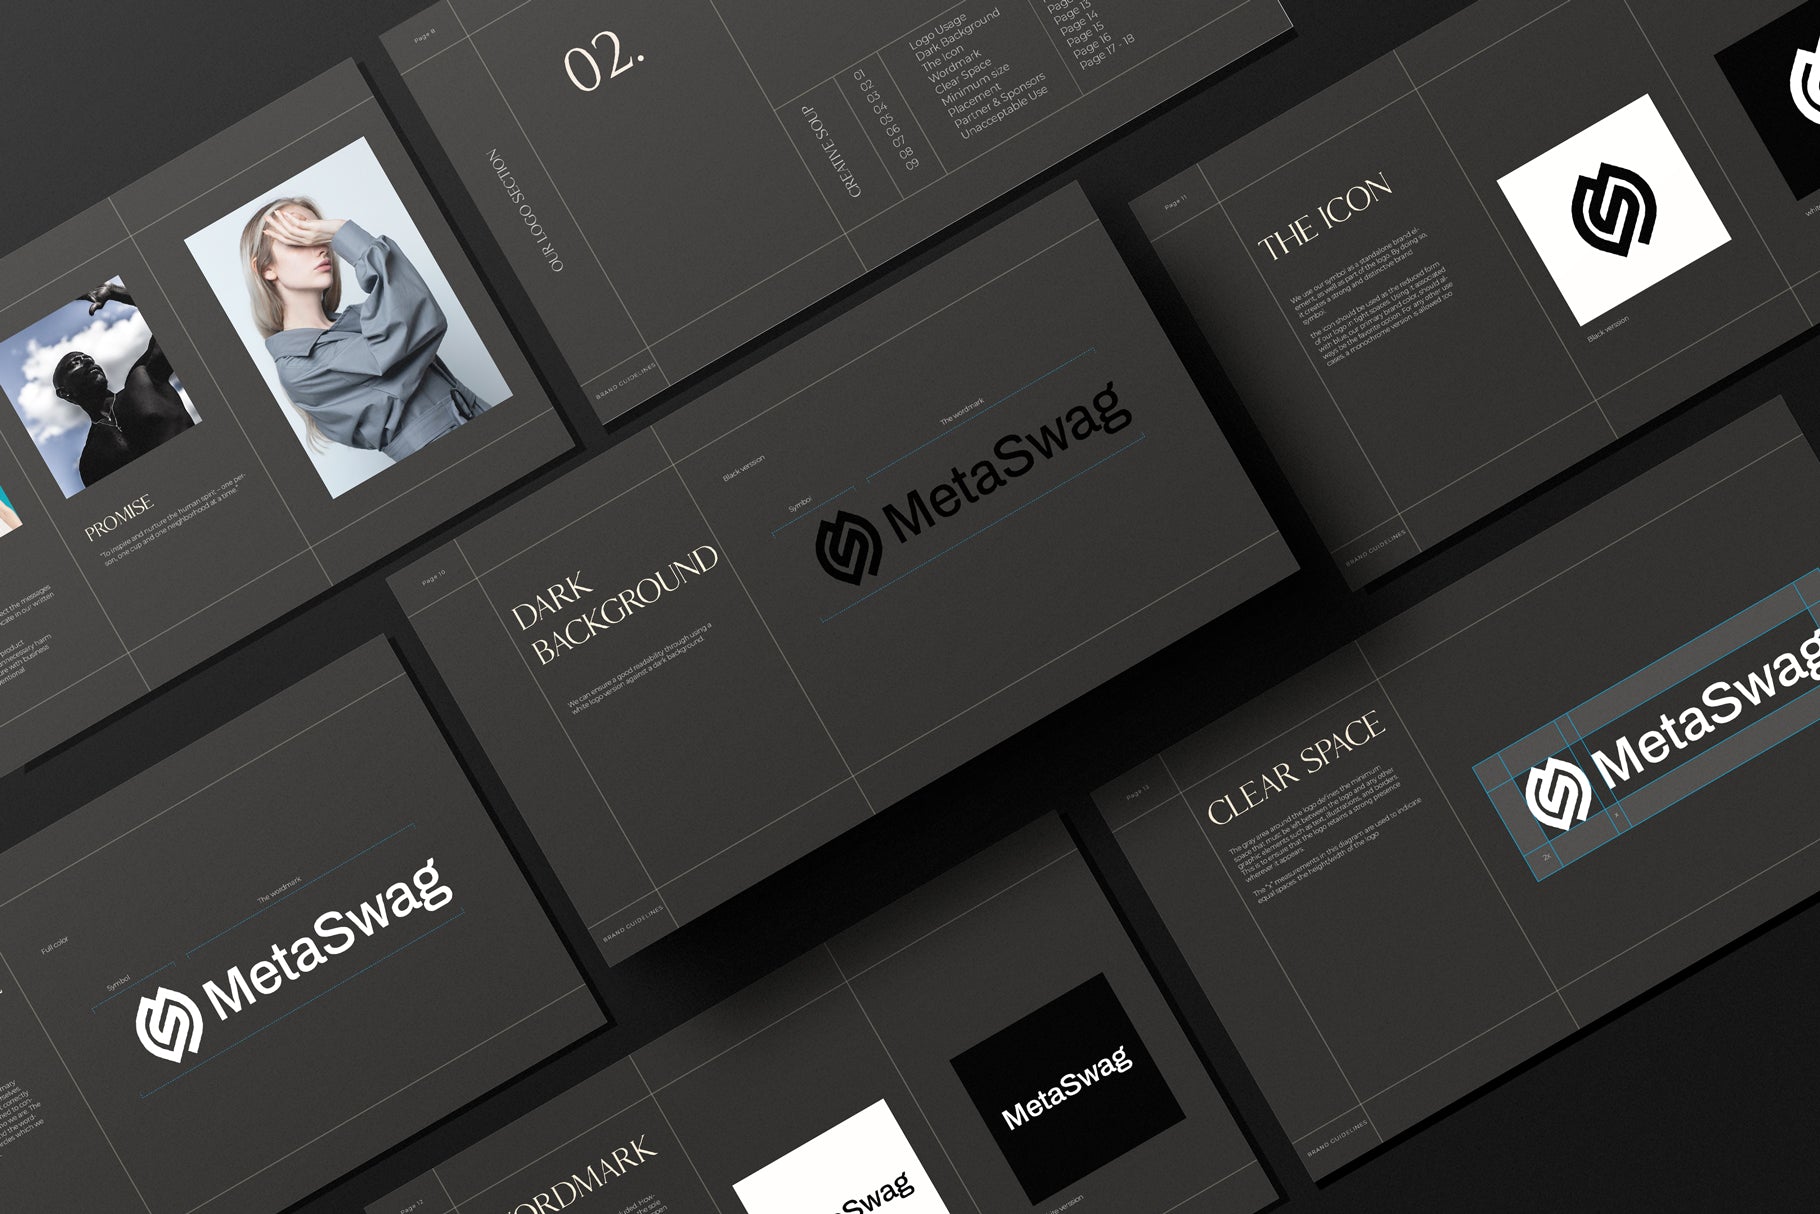 Brand Guidelines Template canva